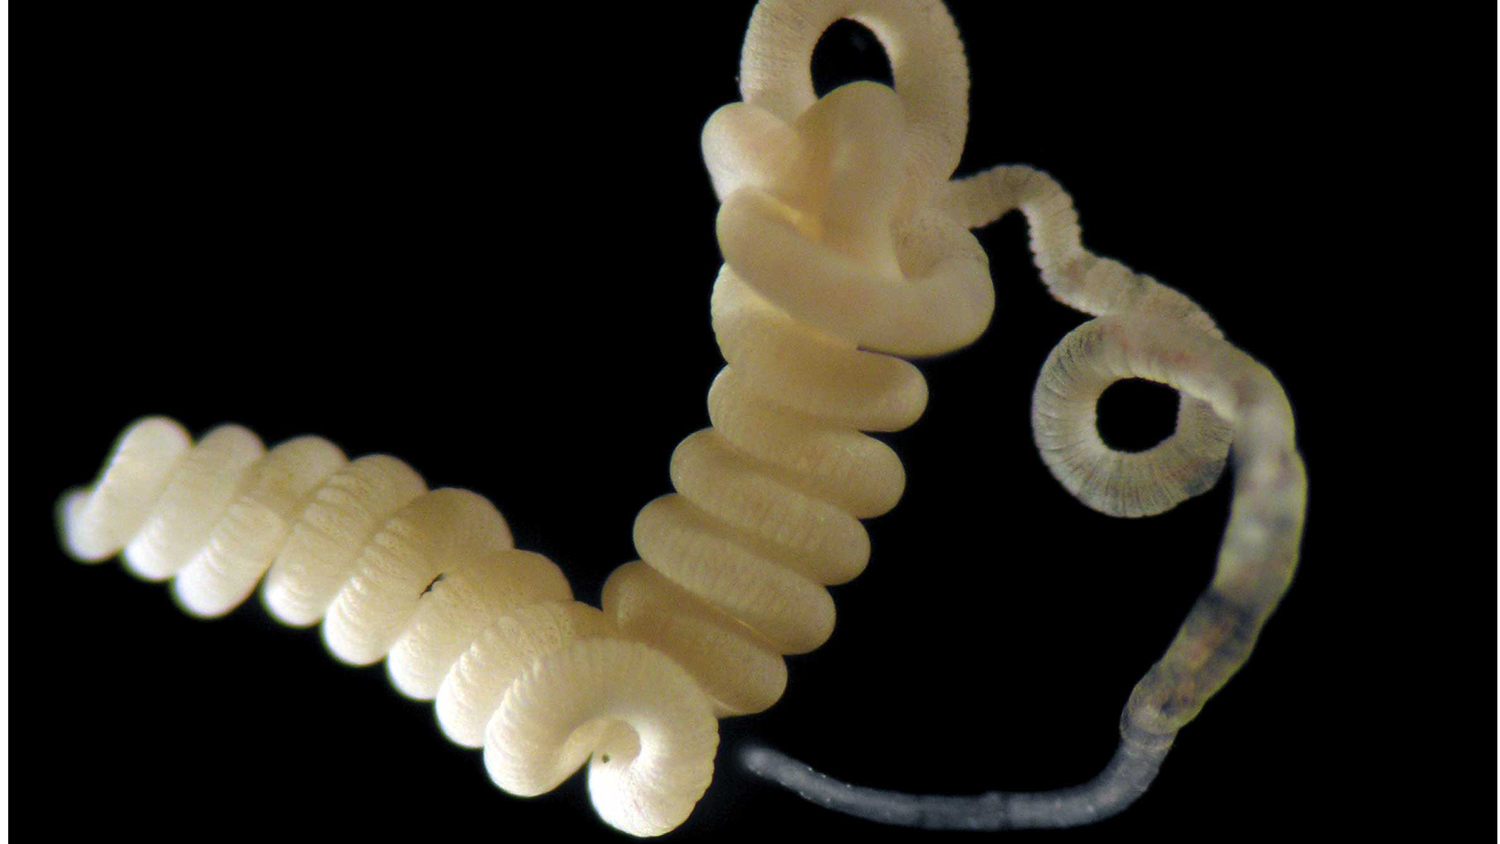 The gutless marine worm Olavius algarvensis was used as a test case for the new technique. This worm does not have a digestive system and instead is fed by a community of symbiotic bacteria living in the worm. Photo courtesy of Christian Lott. 